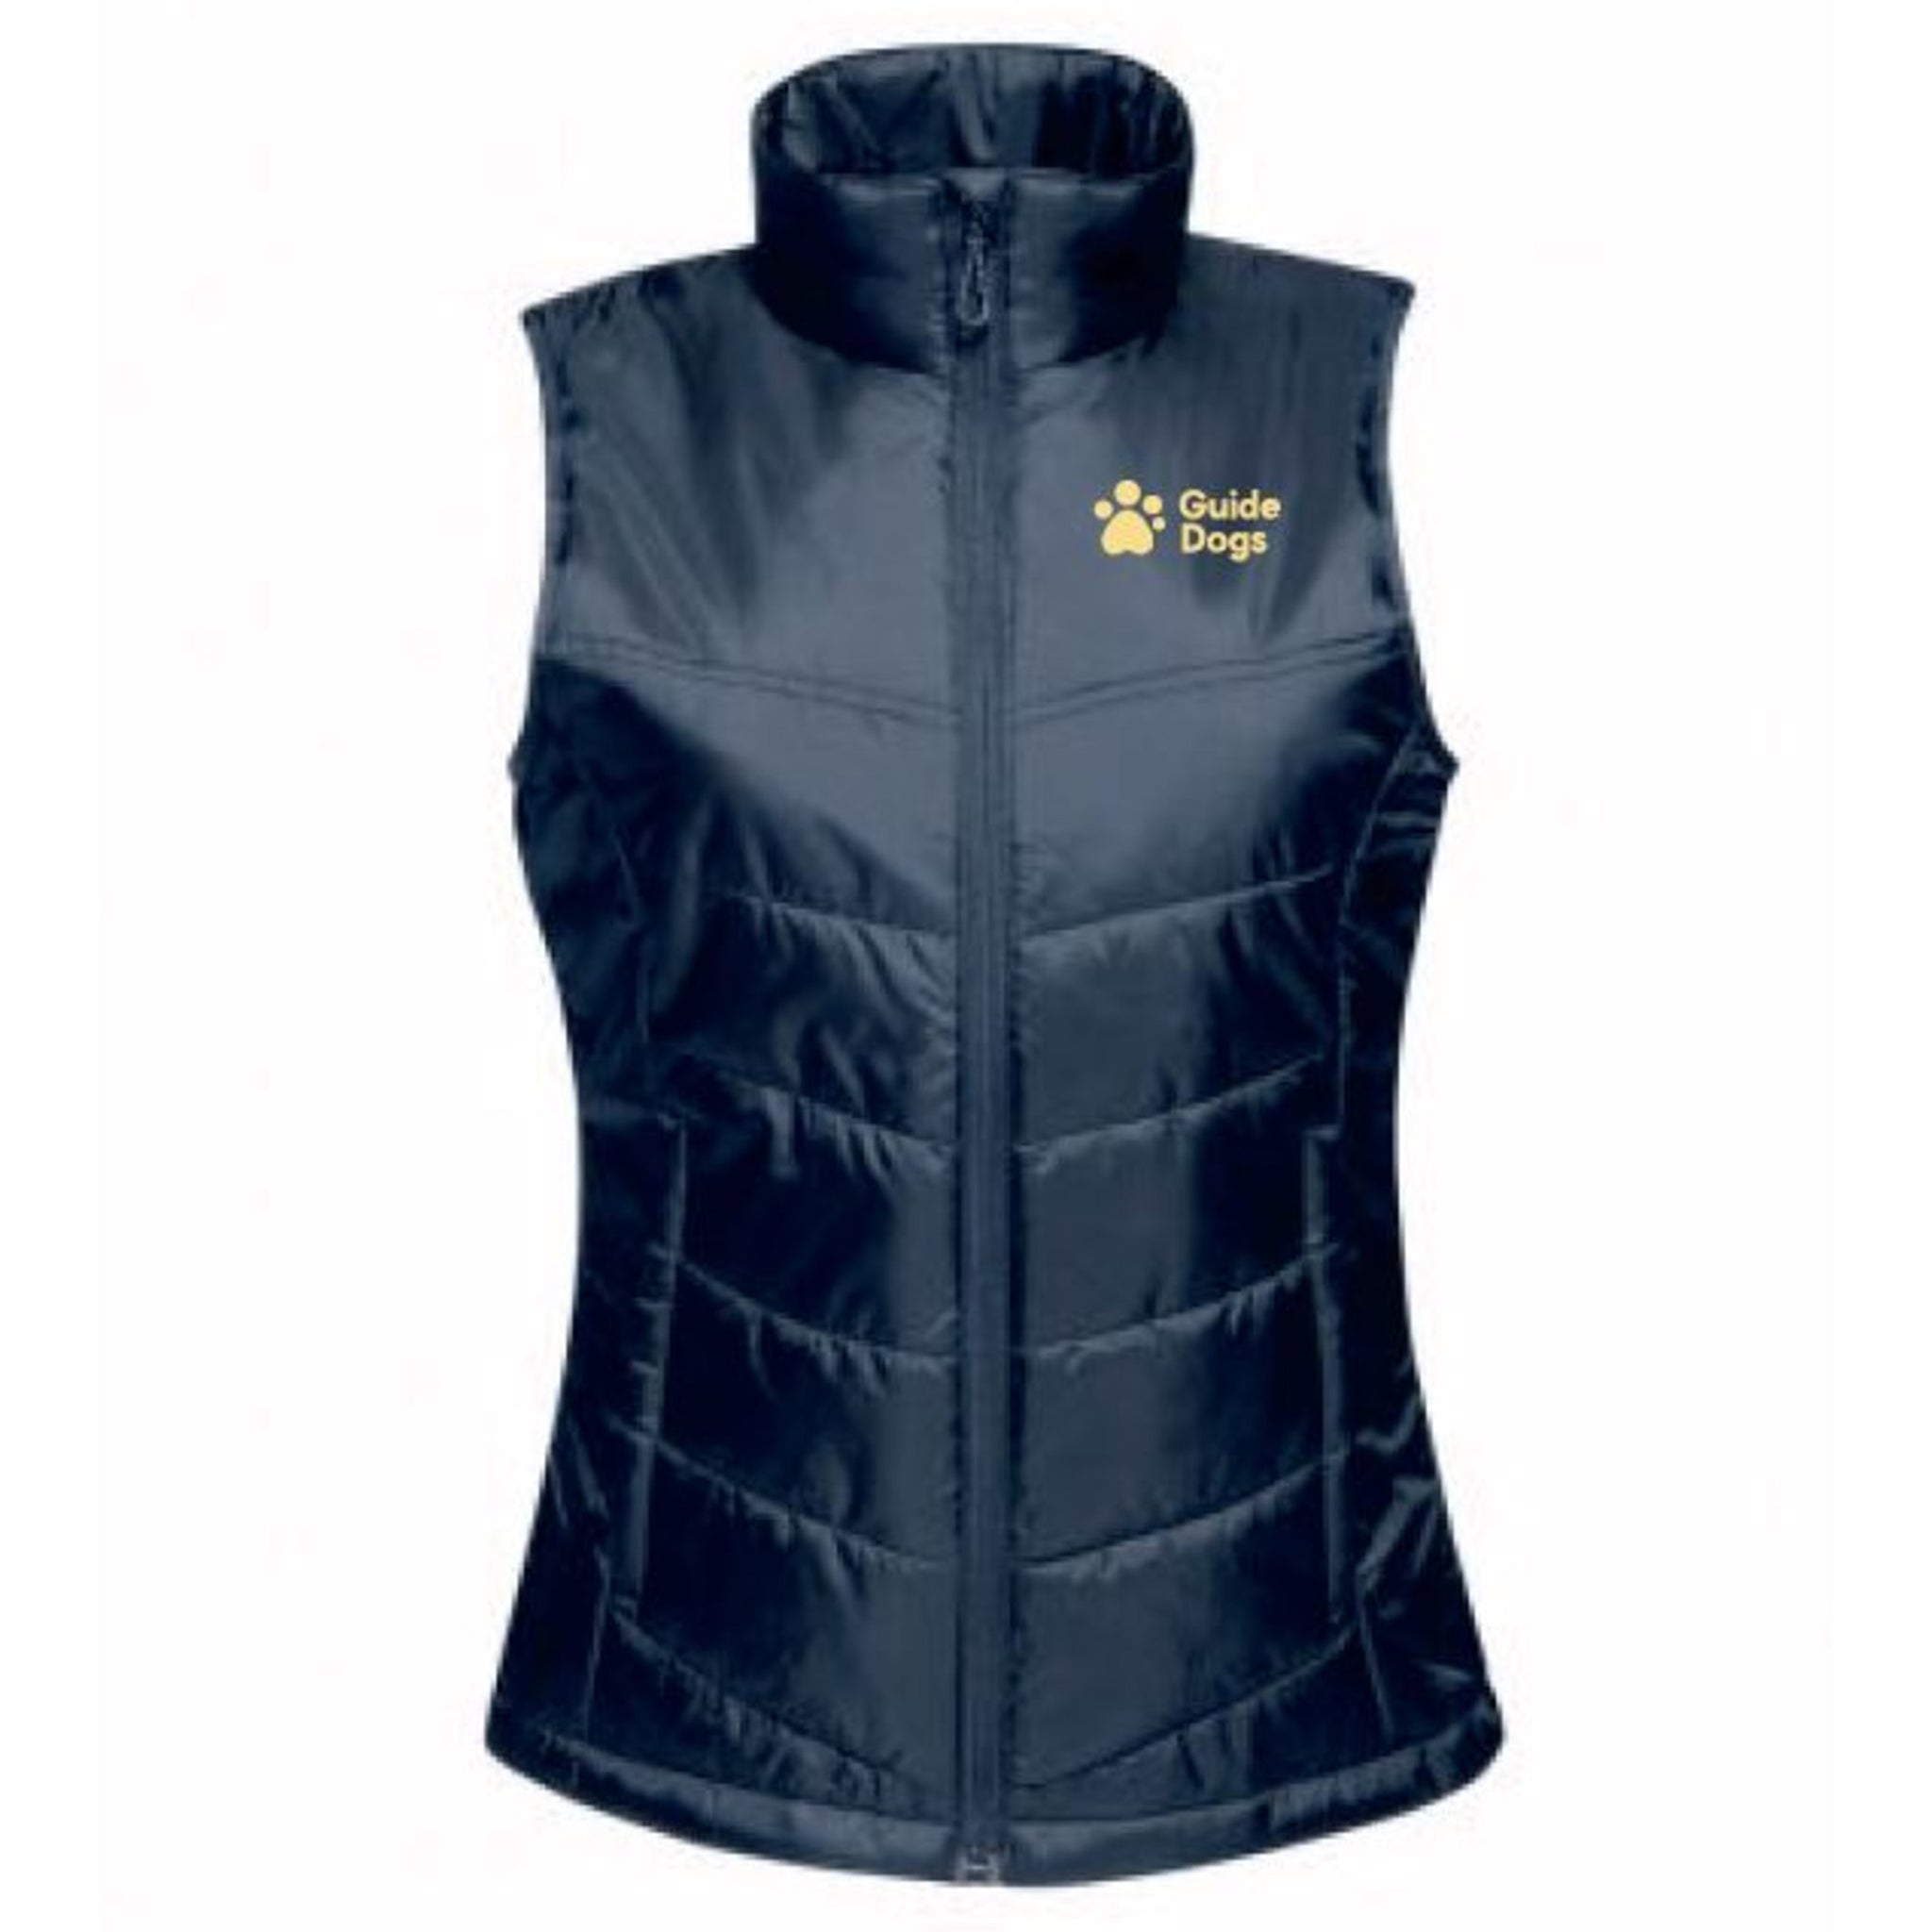 A product image of the Womens Guide Dogs branded Regatta Stage II Body Warmer.